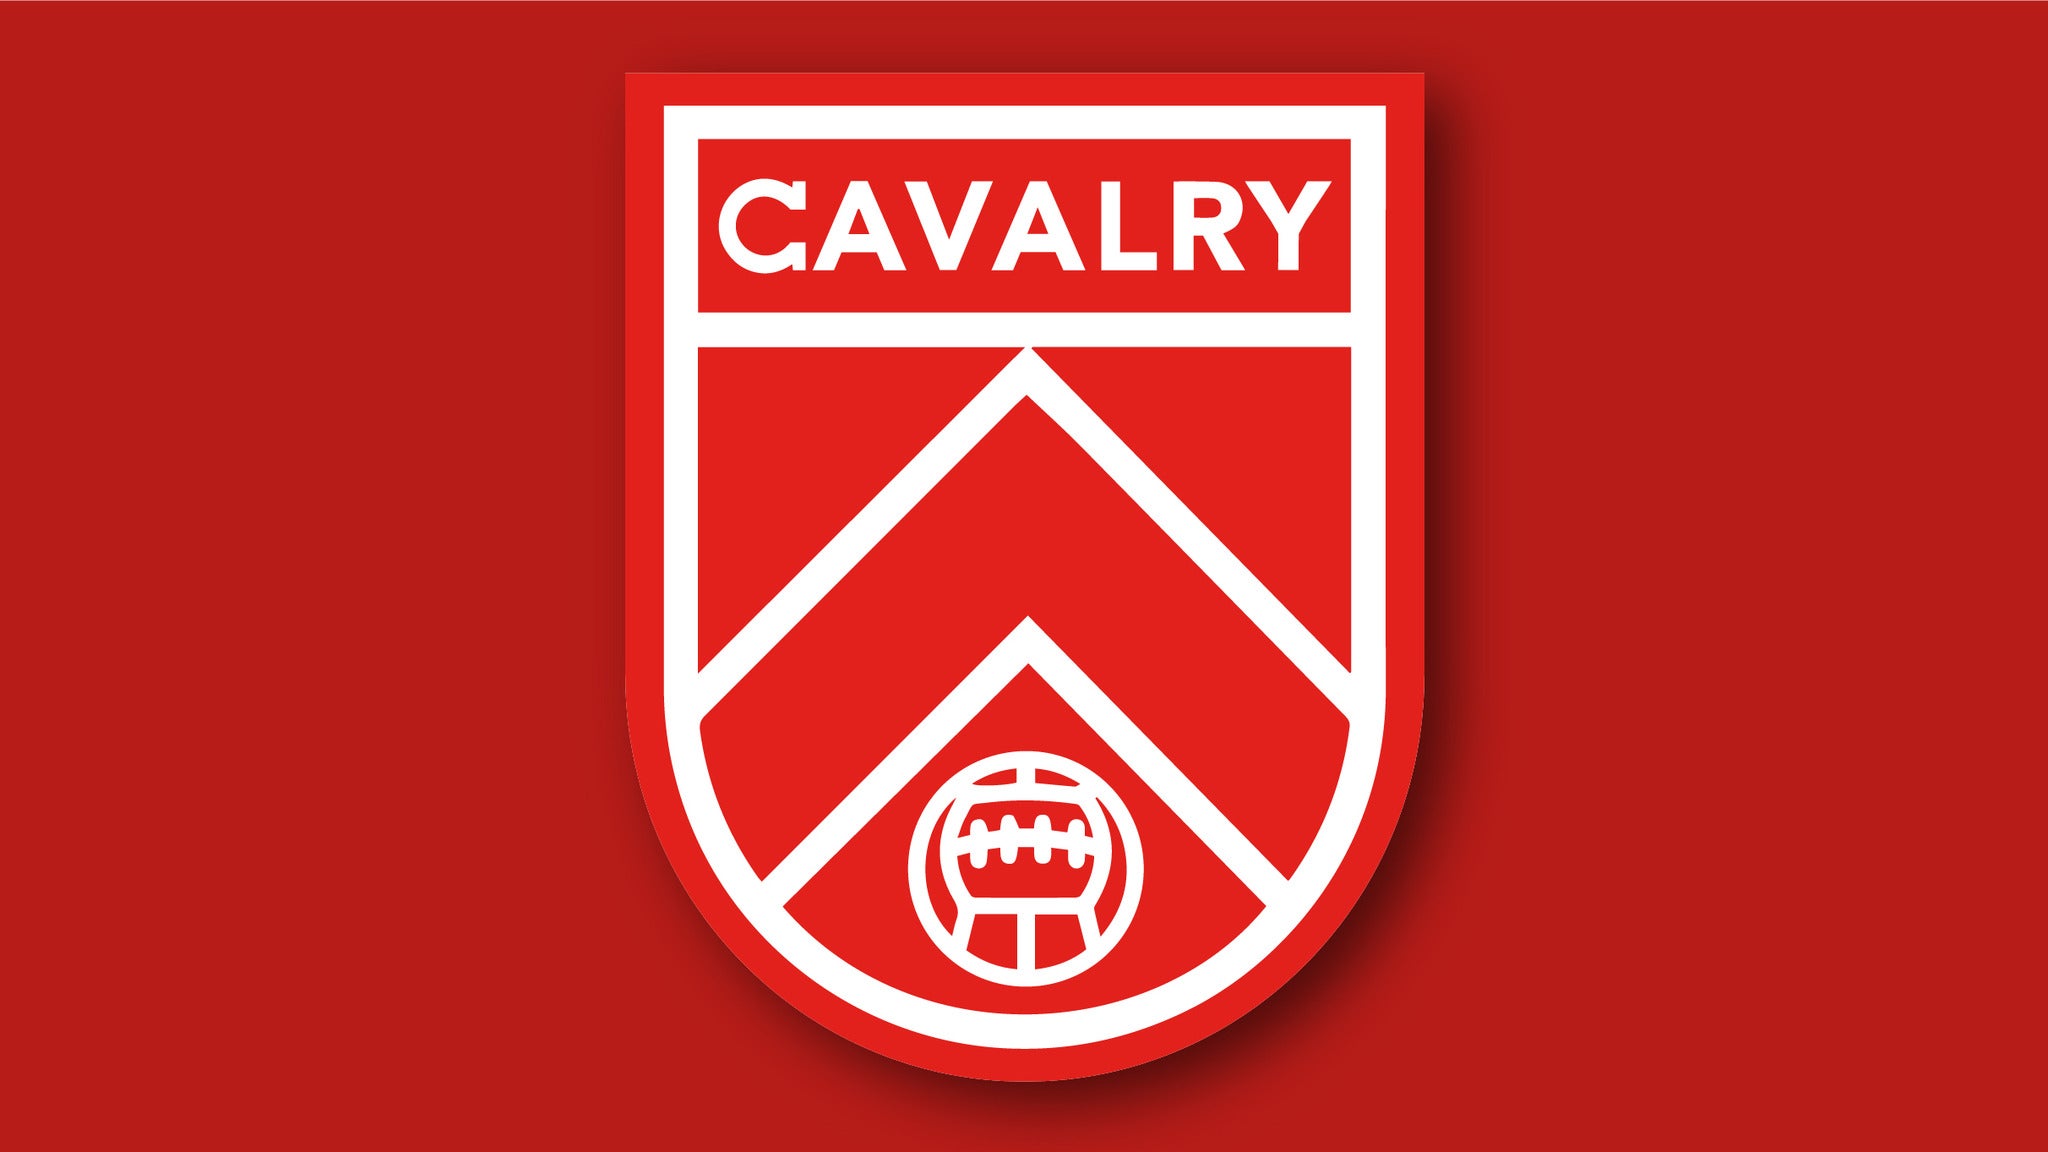 Cavalry FC vs. HFX Wanderers FC in Calgary promo photo for Price Swap presale offer code